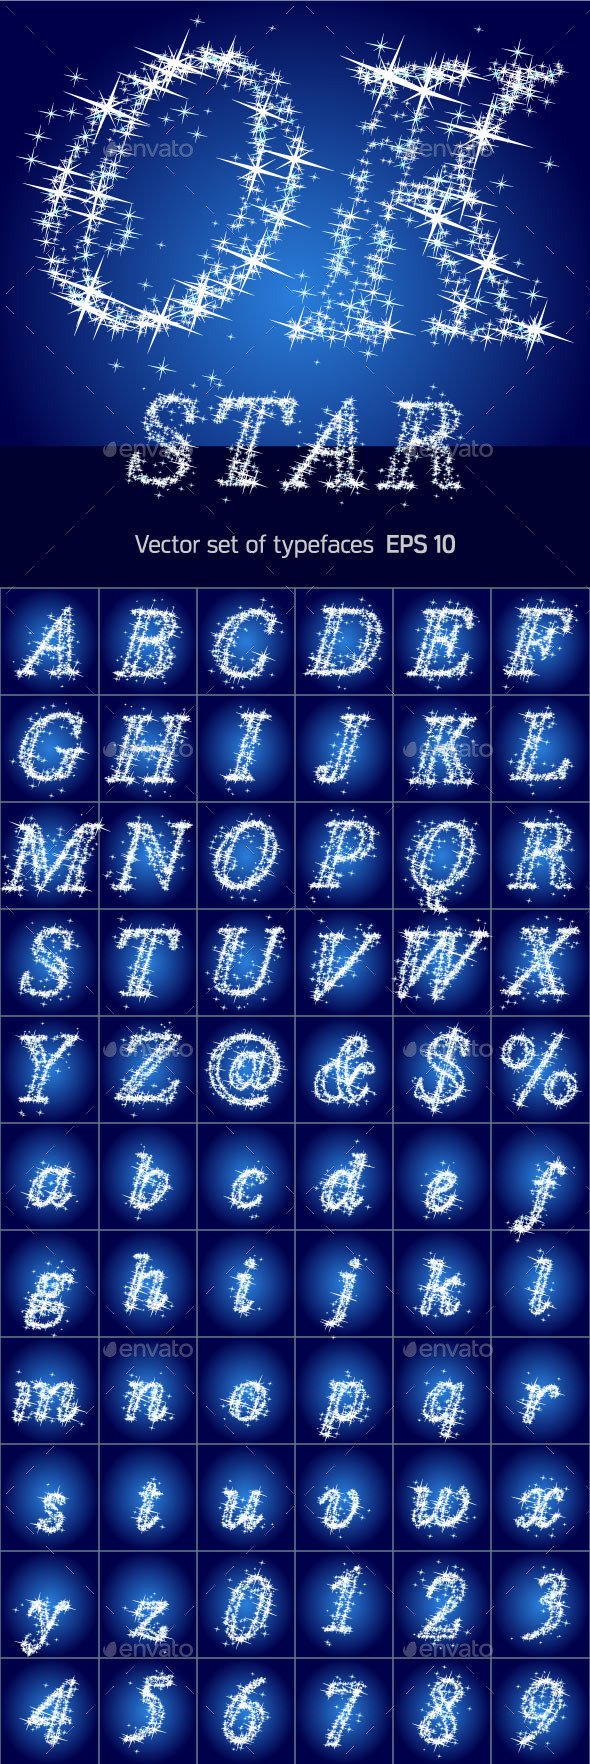 Font Characters of Shining Stars